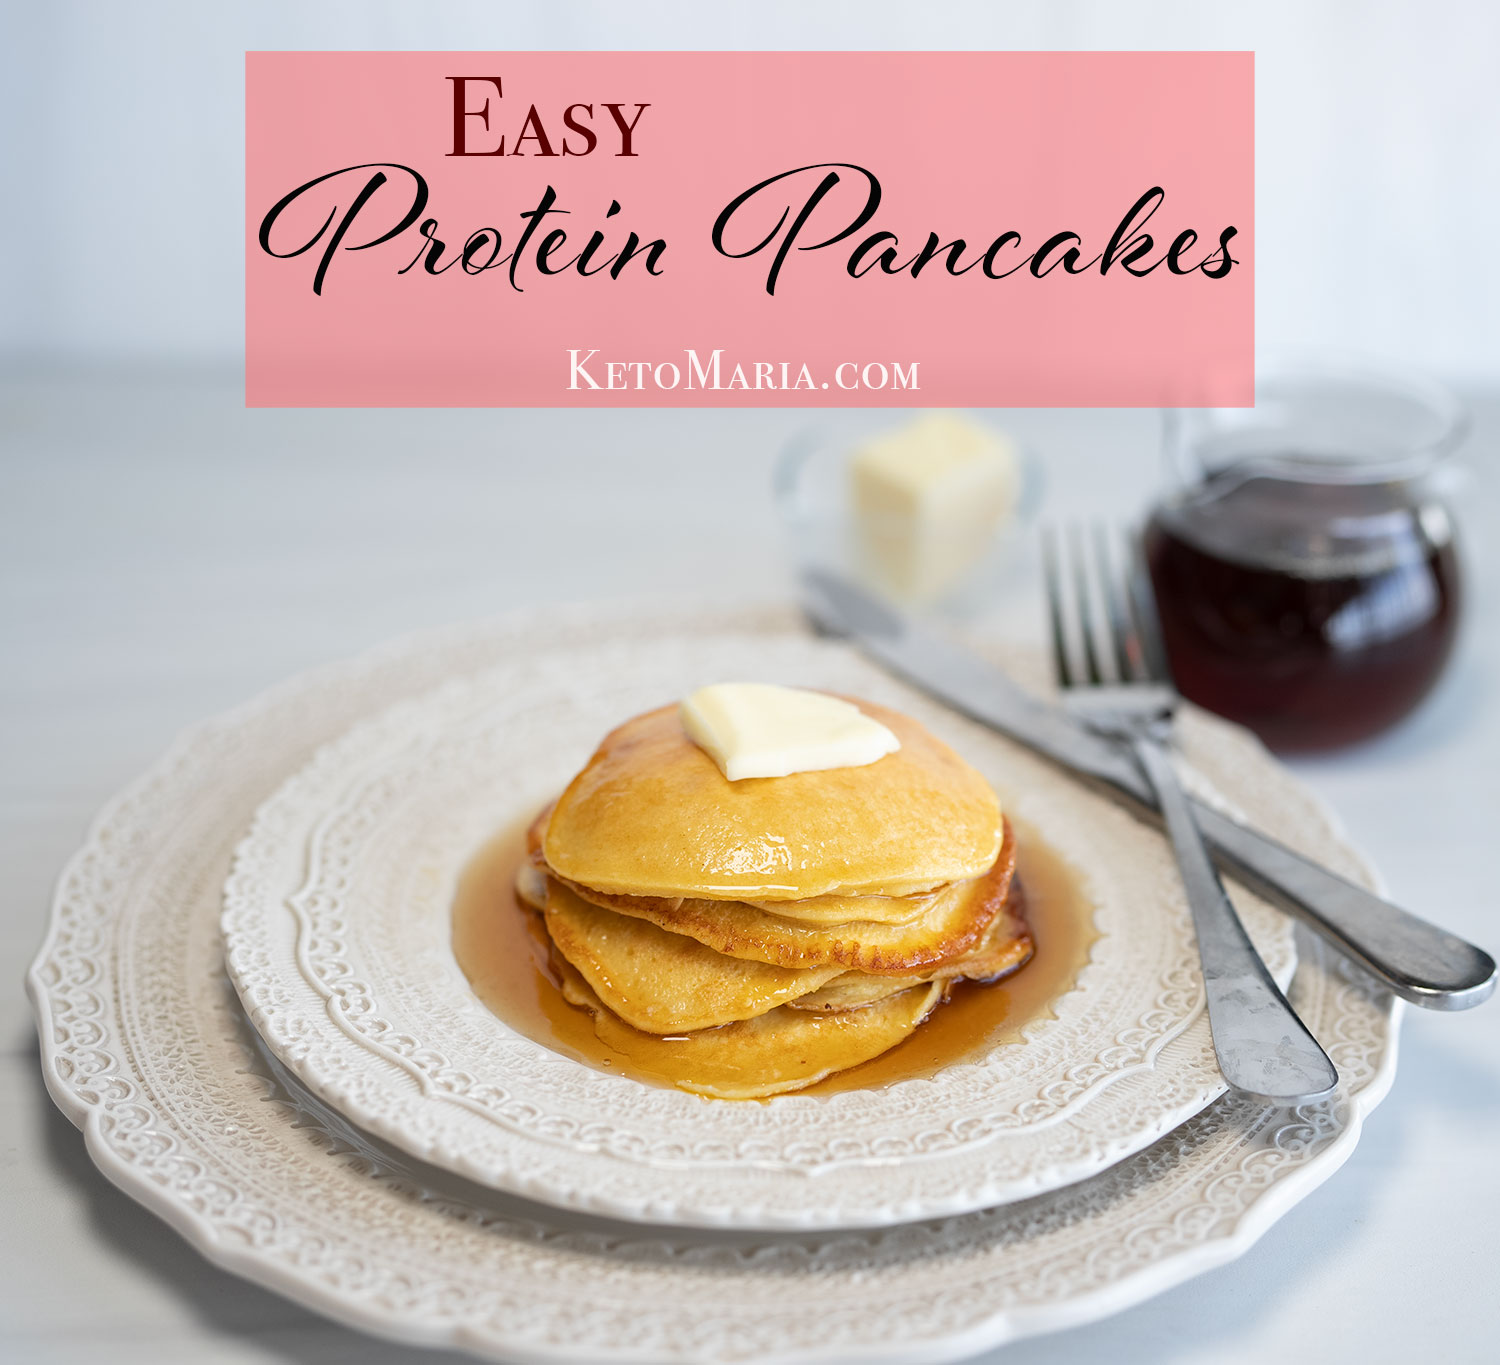 Quick and Healthy Protein Pancakes Recipe Under 100 Calories